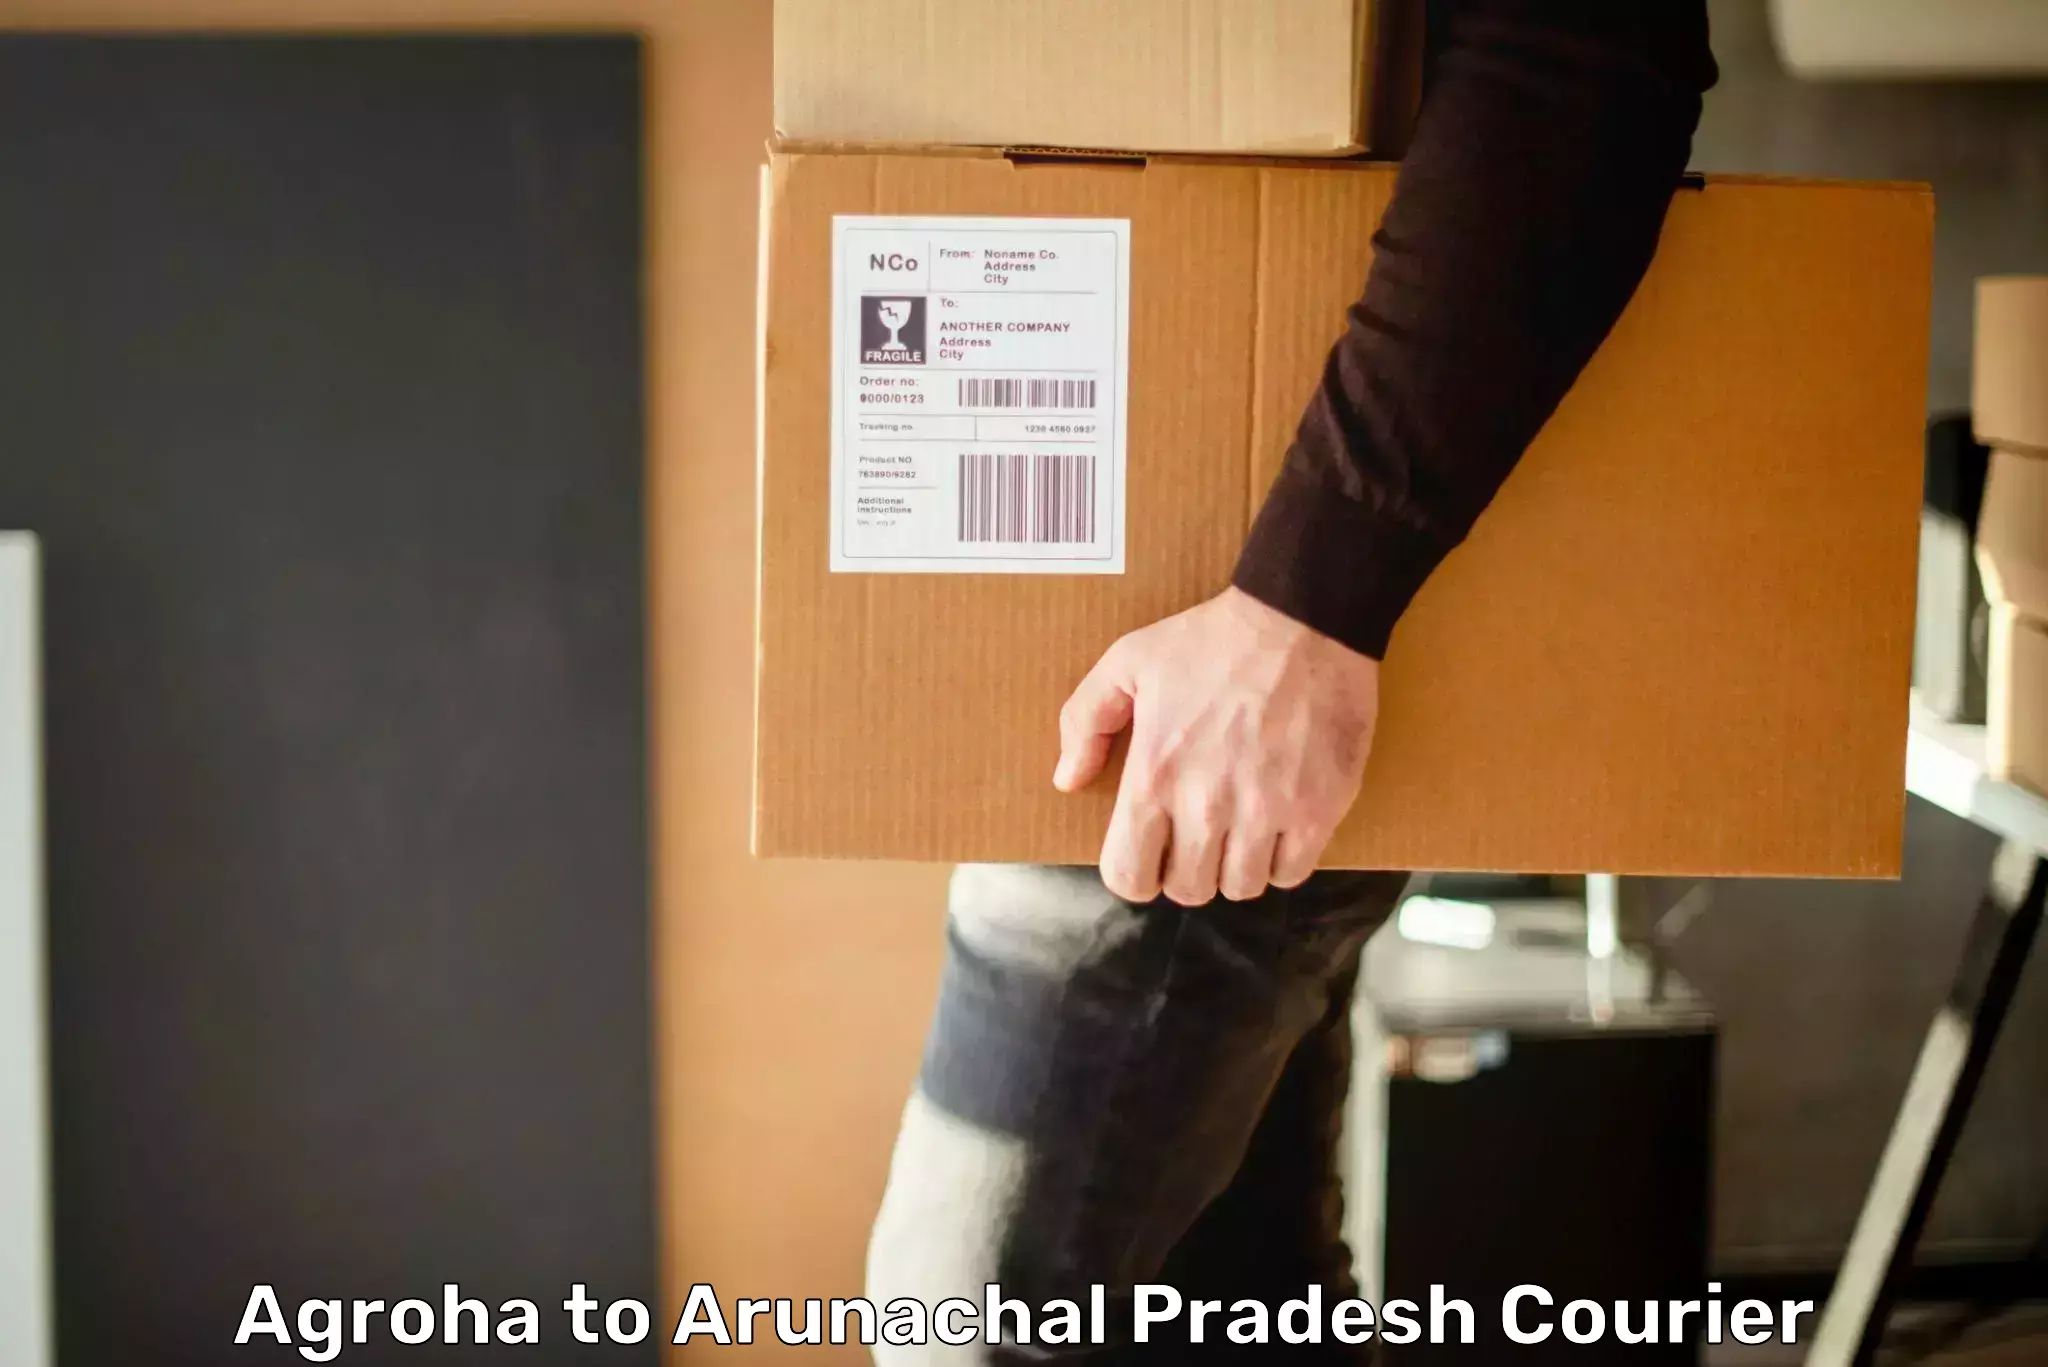 Advanced courier platforms Agroha to Aalo